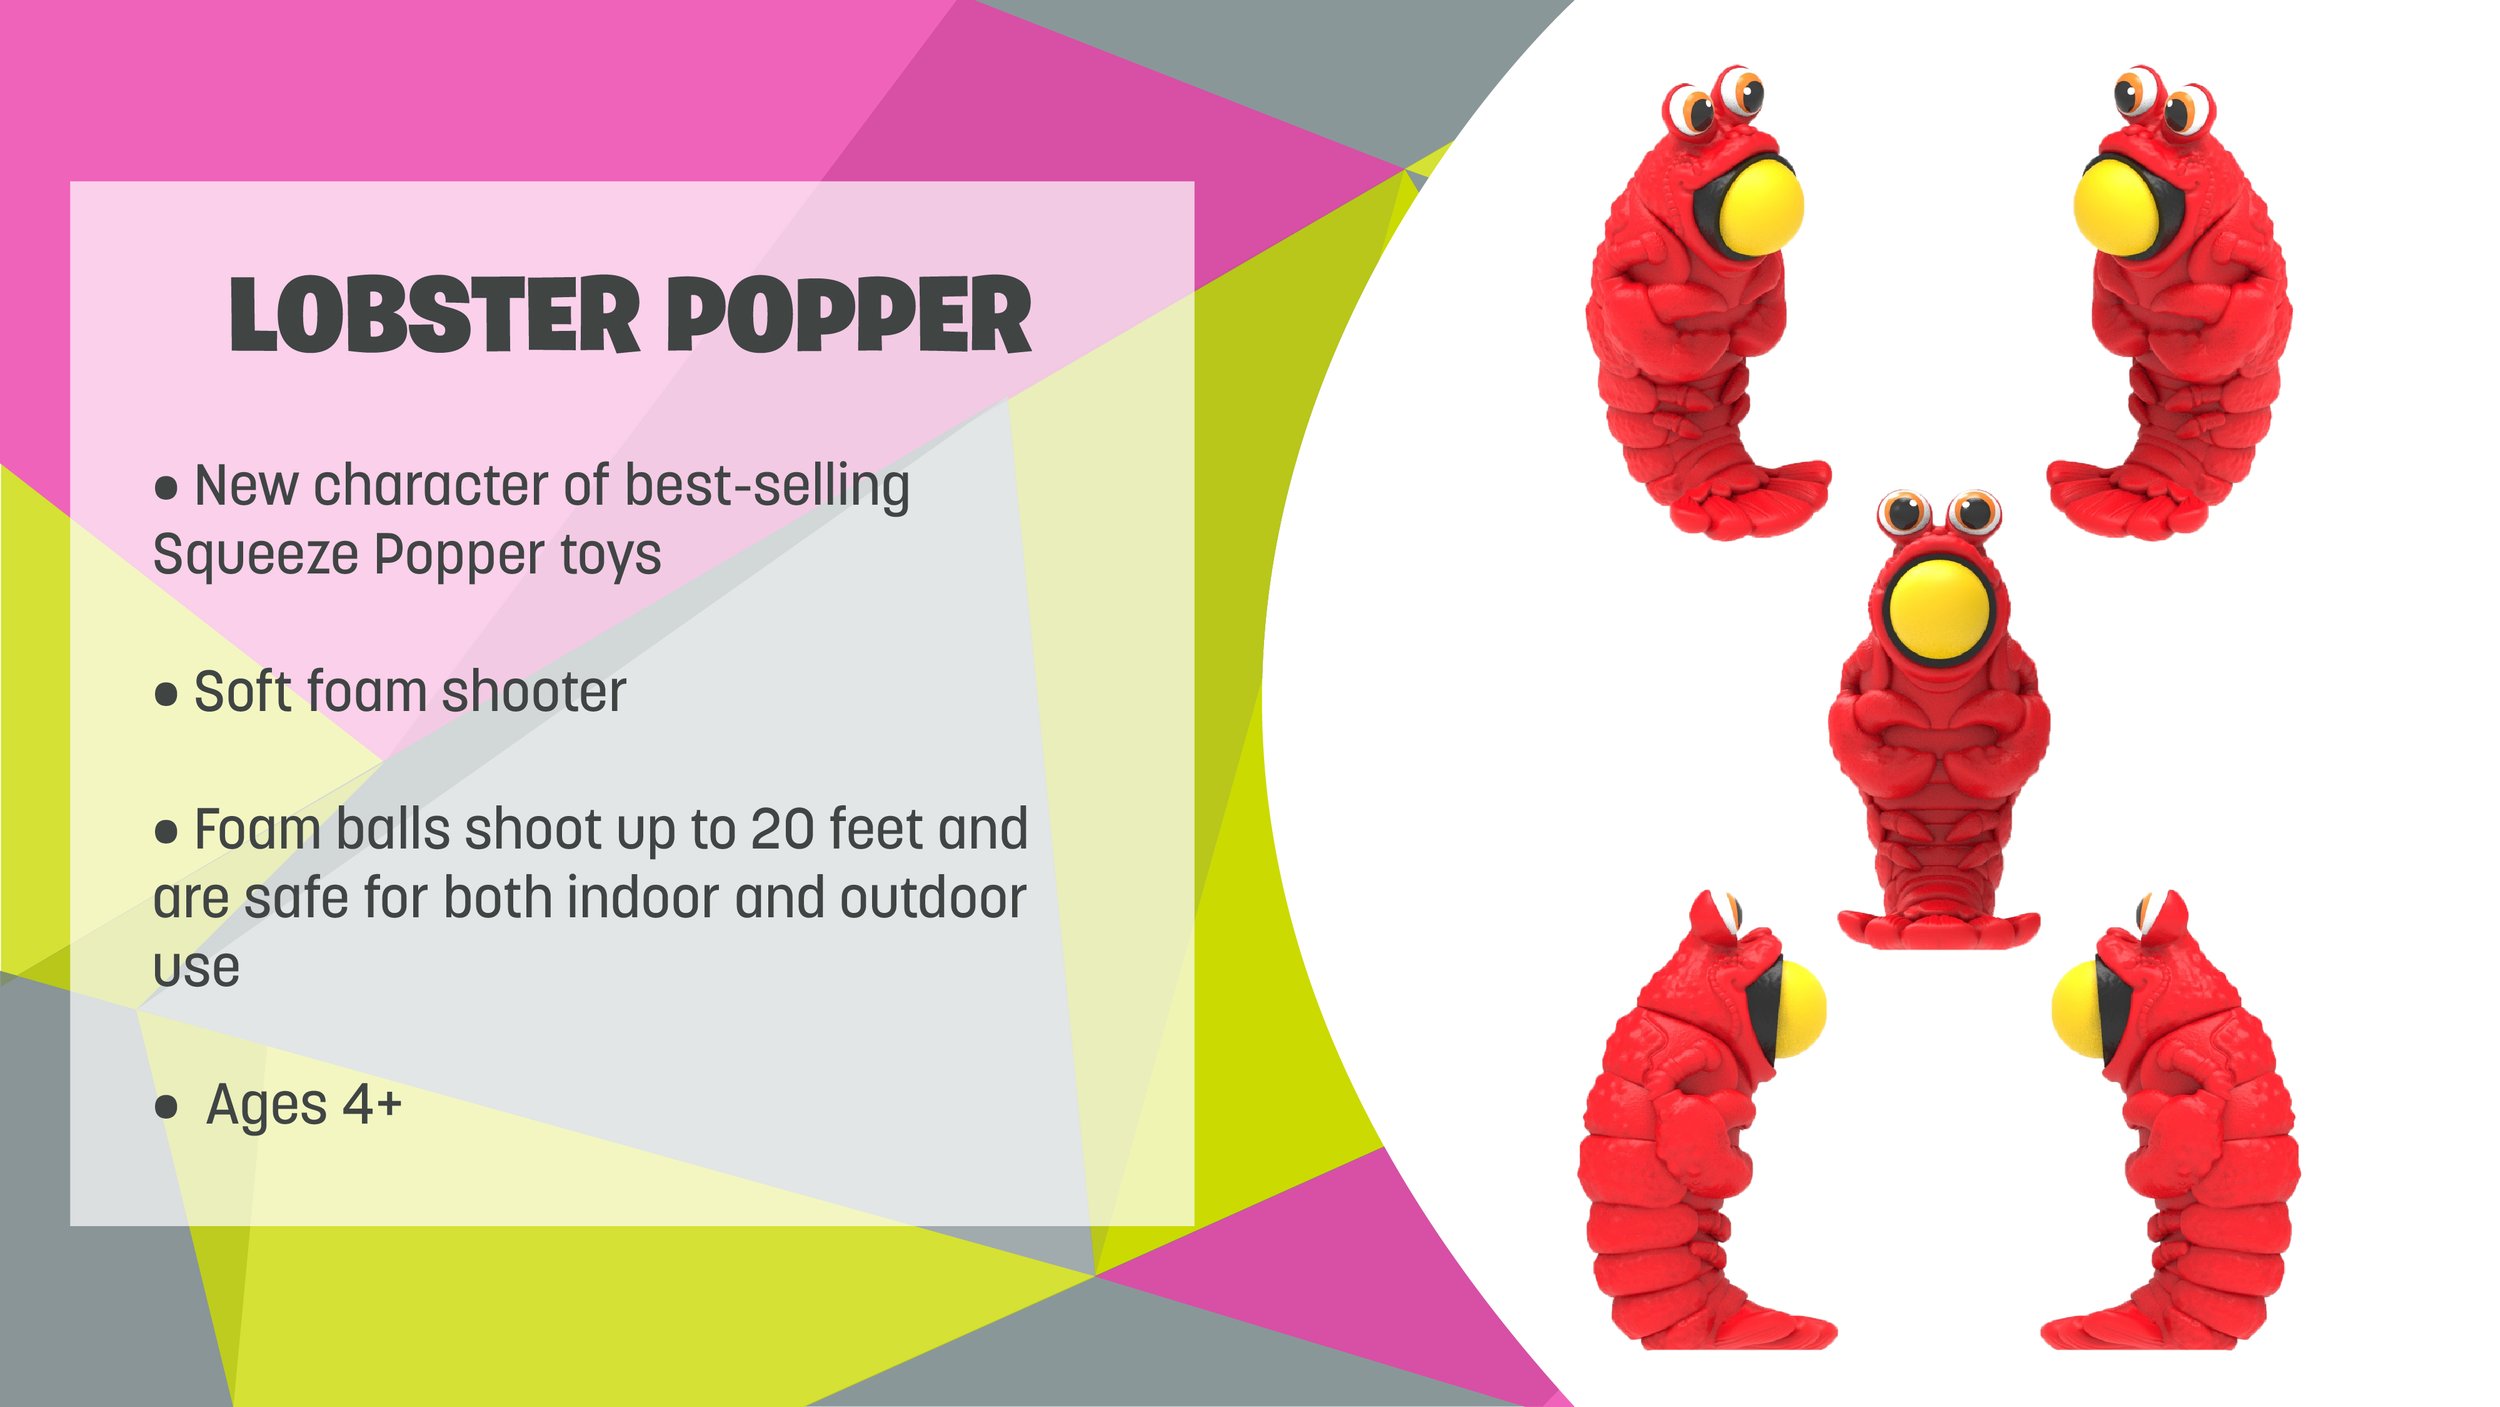 7. Product Page_Lobster Popper.jpg